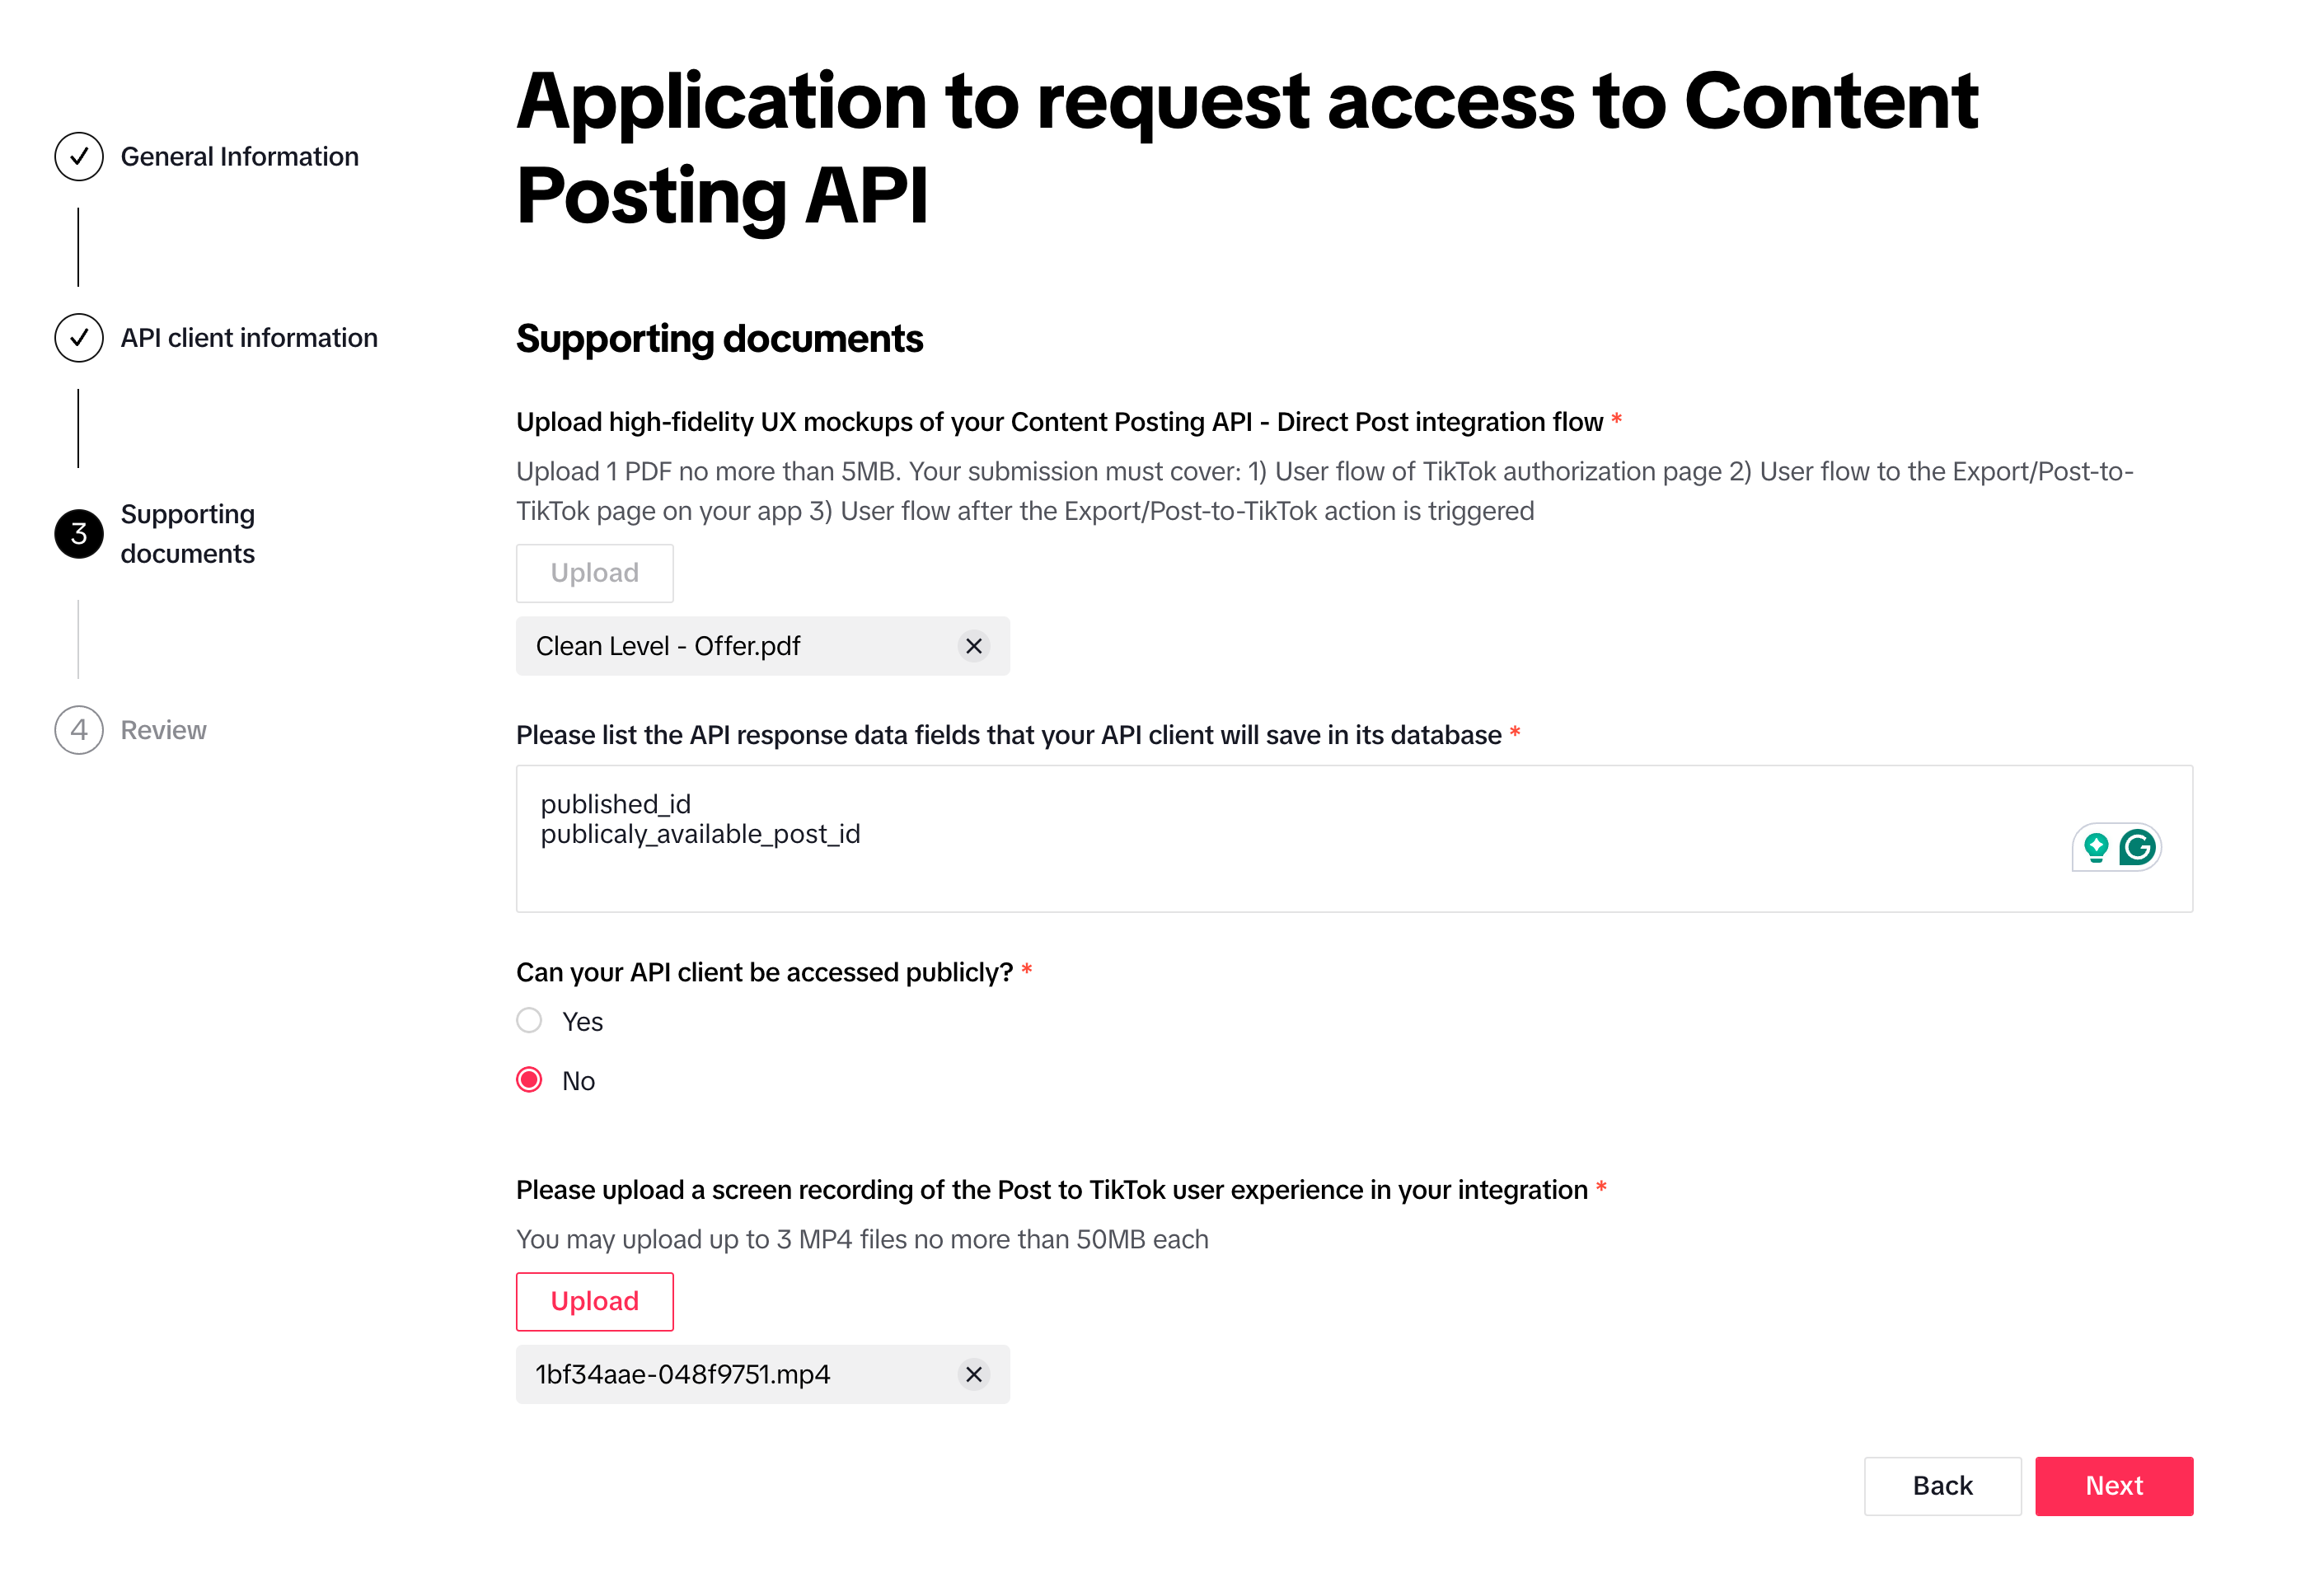 TikTok Direct Post Application - Supporting documents